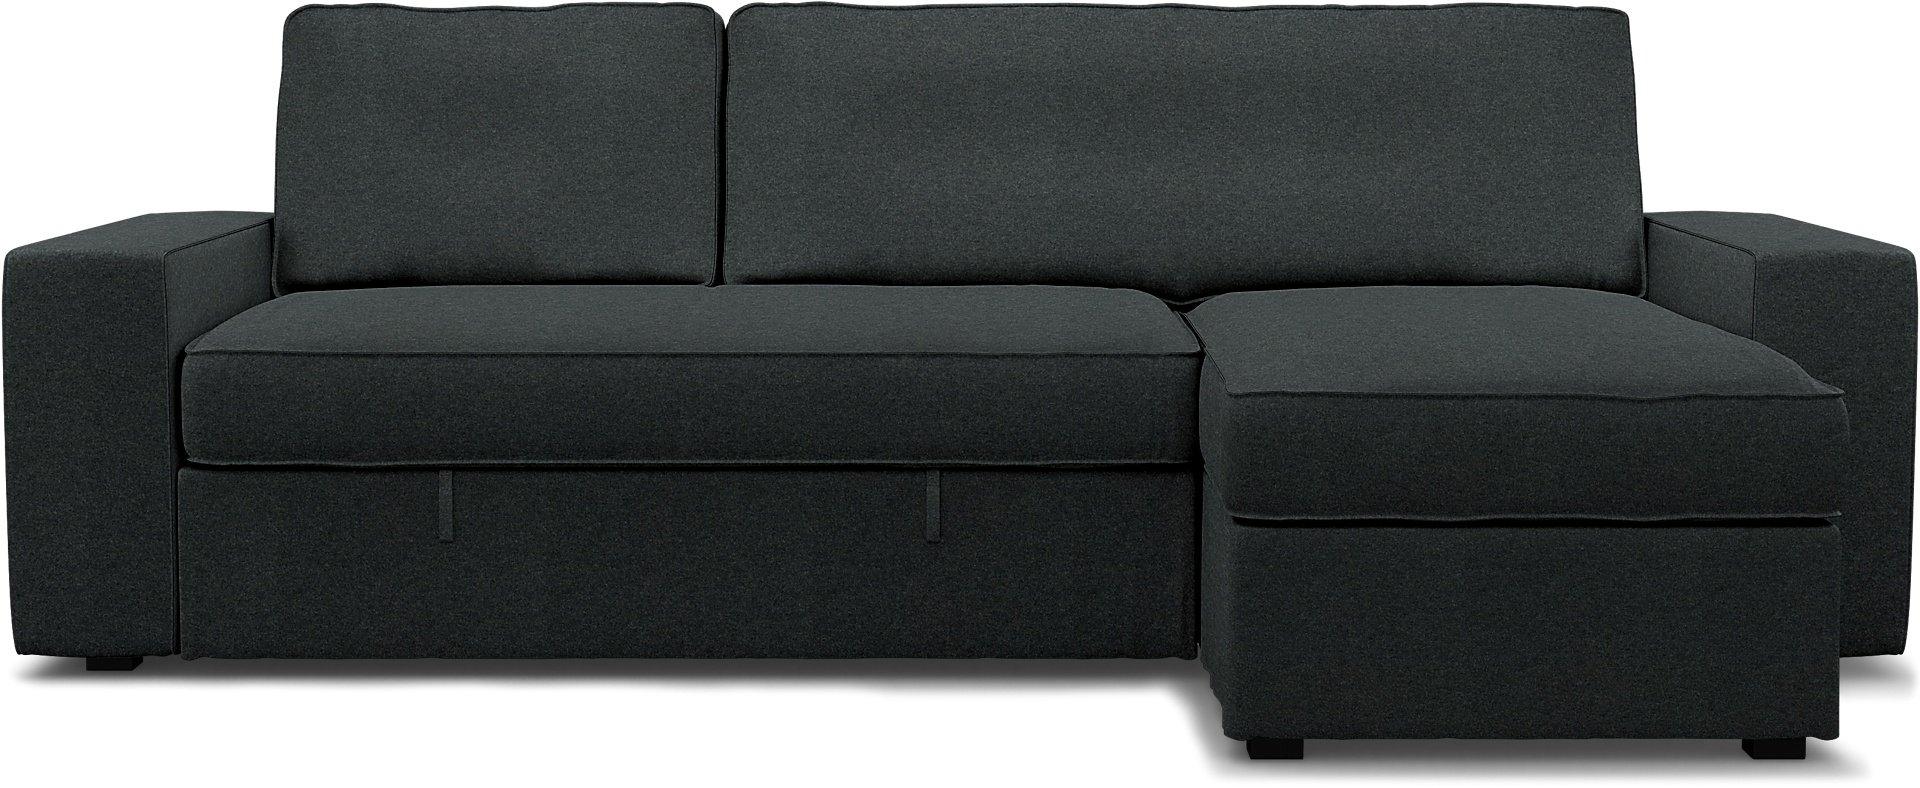 IKEA - Vilasund sofa bed with chaise cover, Stone, Wool - Bemz